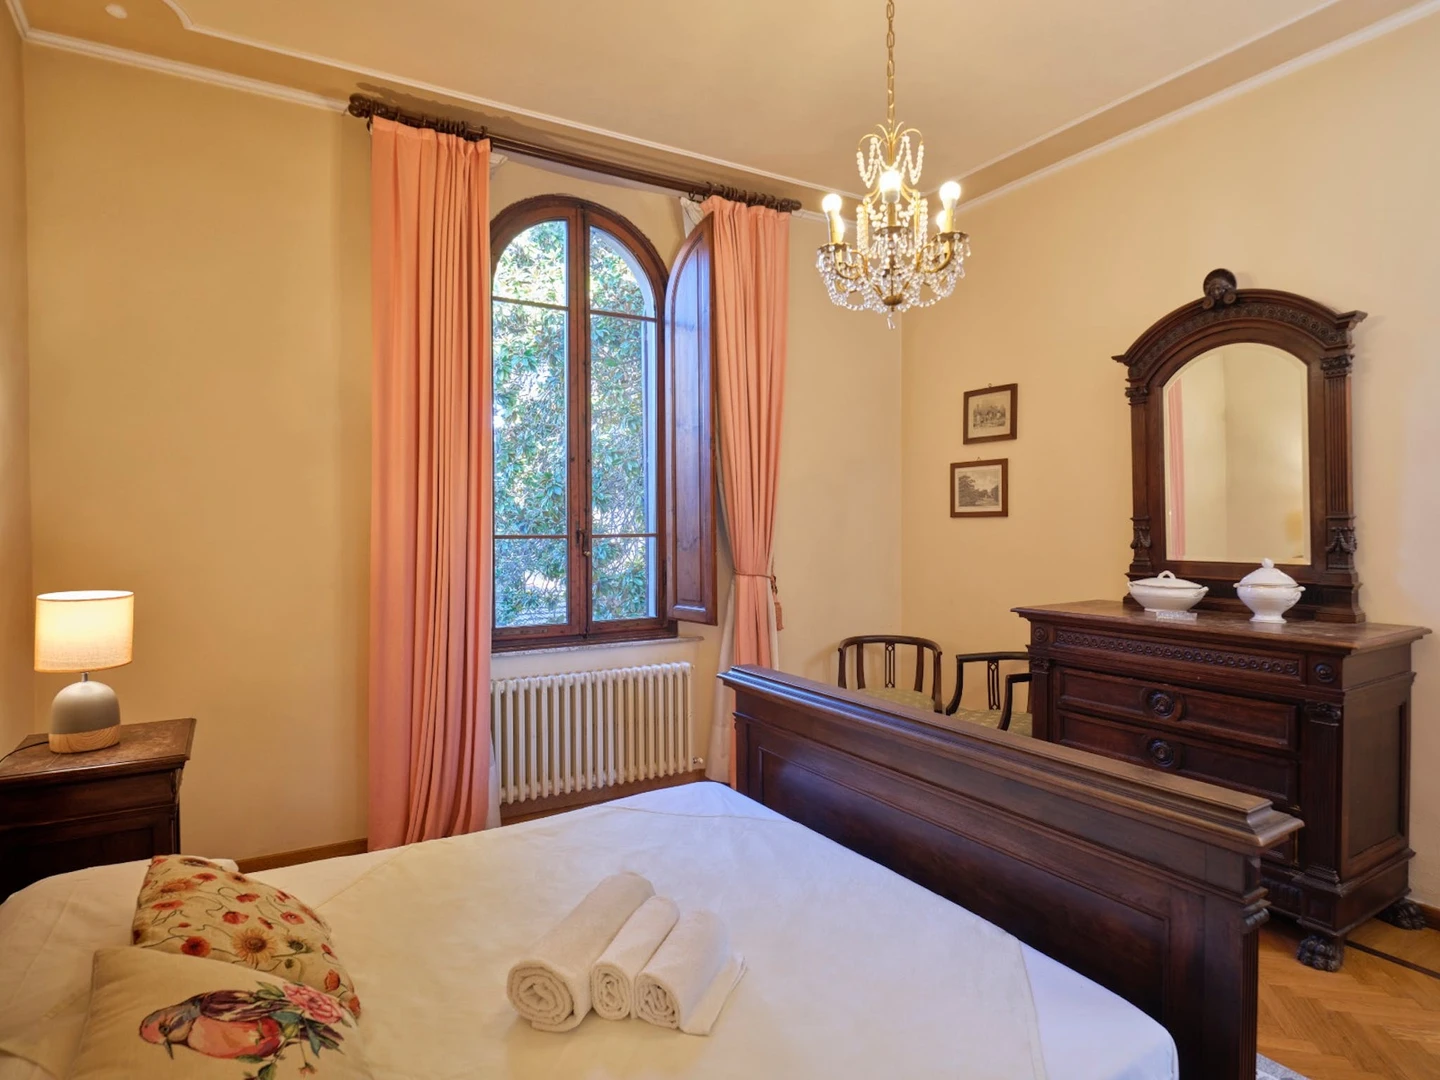 Renting rooms by the month in Siena